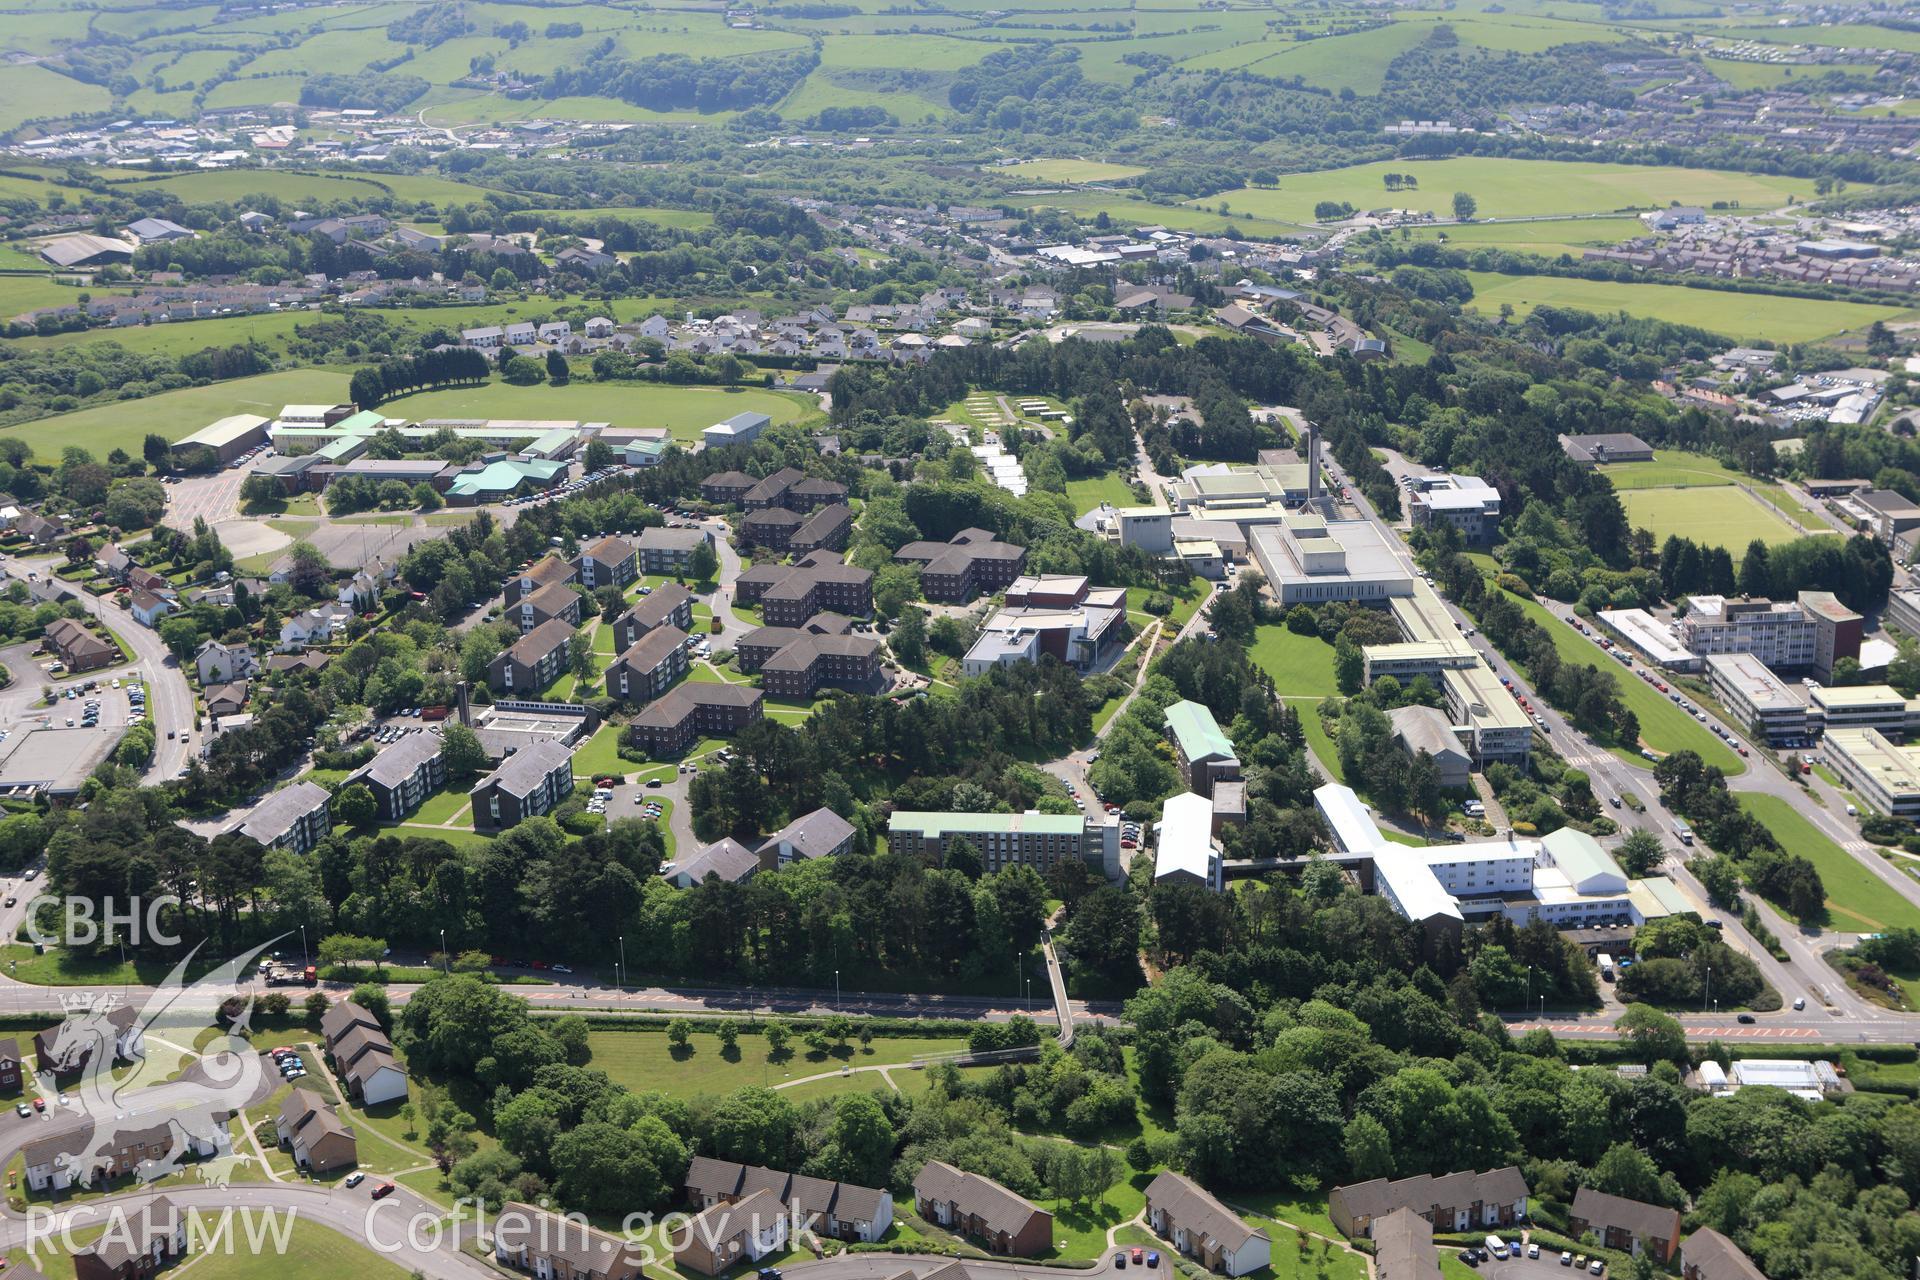 RCAHMW colour oblique aerial photograph of University College of Wales, Aberystwyth. Taken on 02 June 2009 by Toby Driver